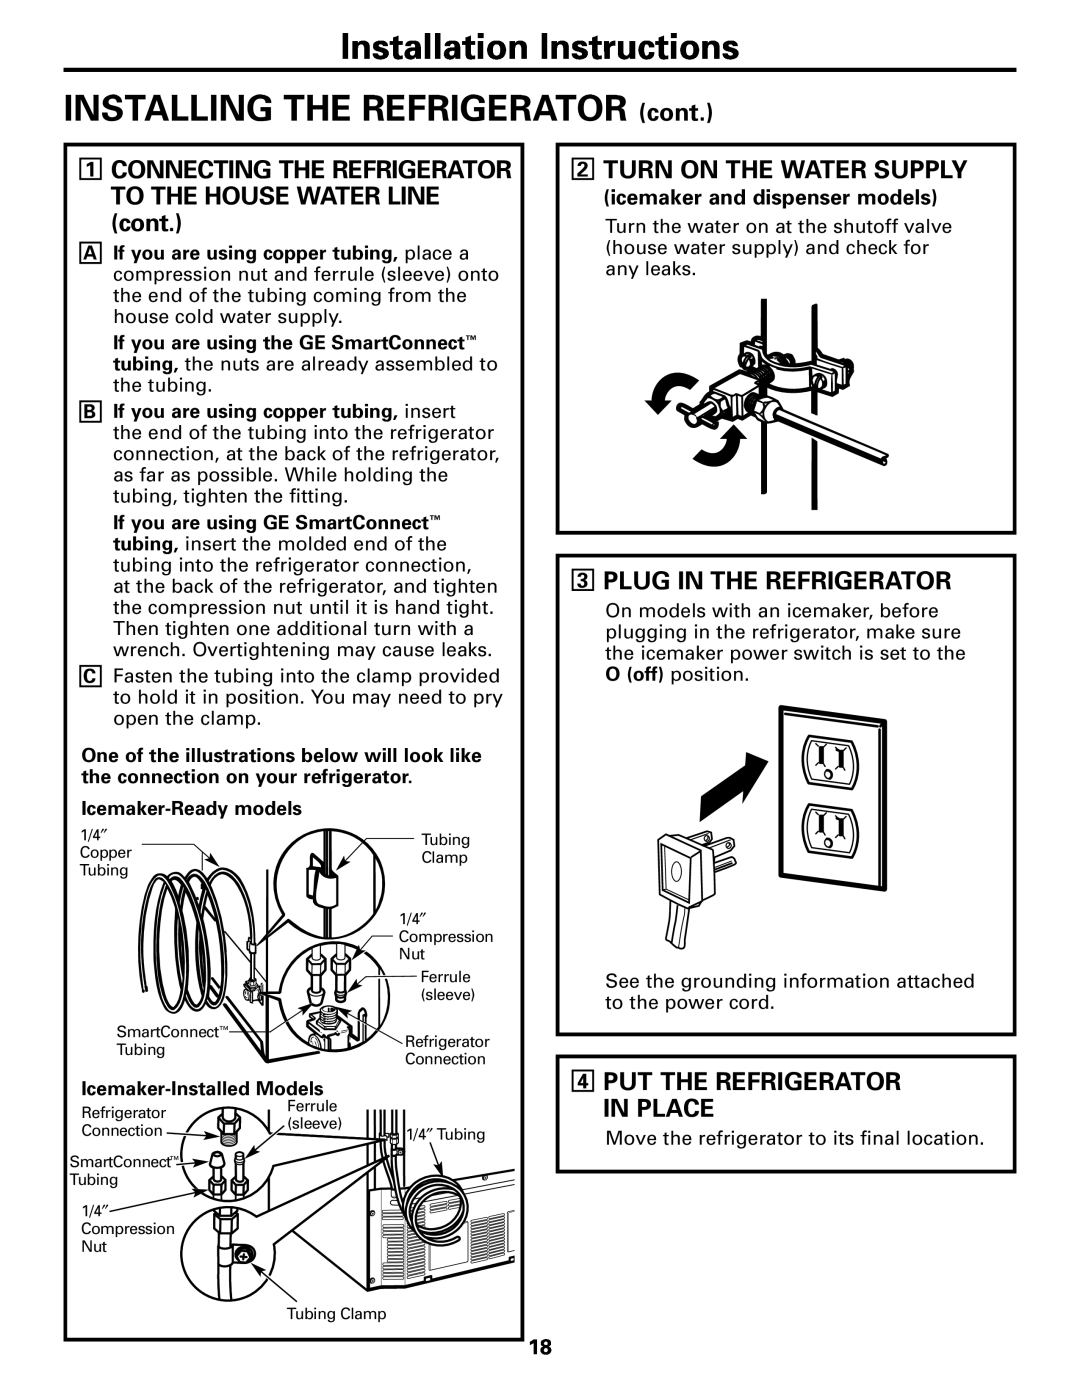 GE 197D4618P003 operating instructions Installation Instructions INSTALLING THE REFRIGERATOR cont, Turn On The Water Supply 